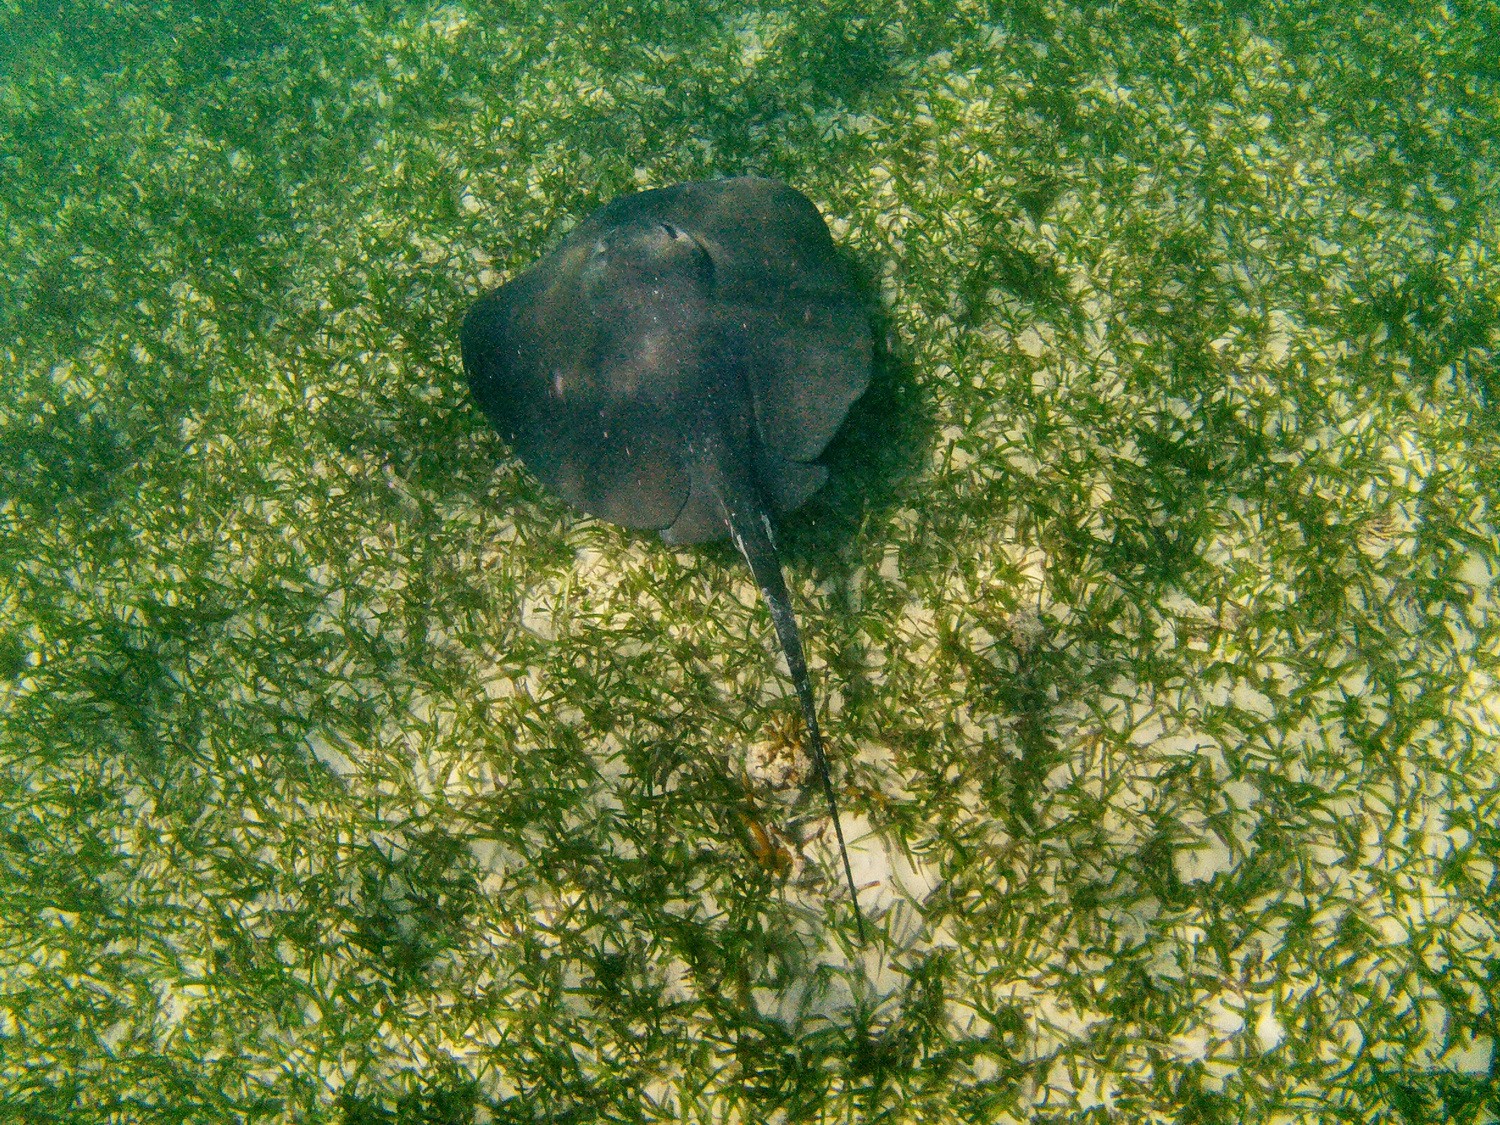 Rough Tail Sting Ray